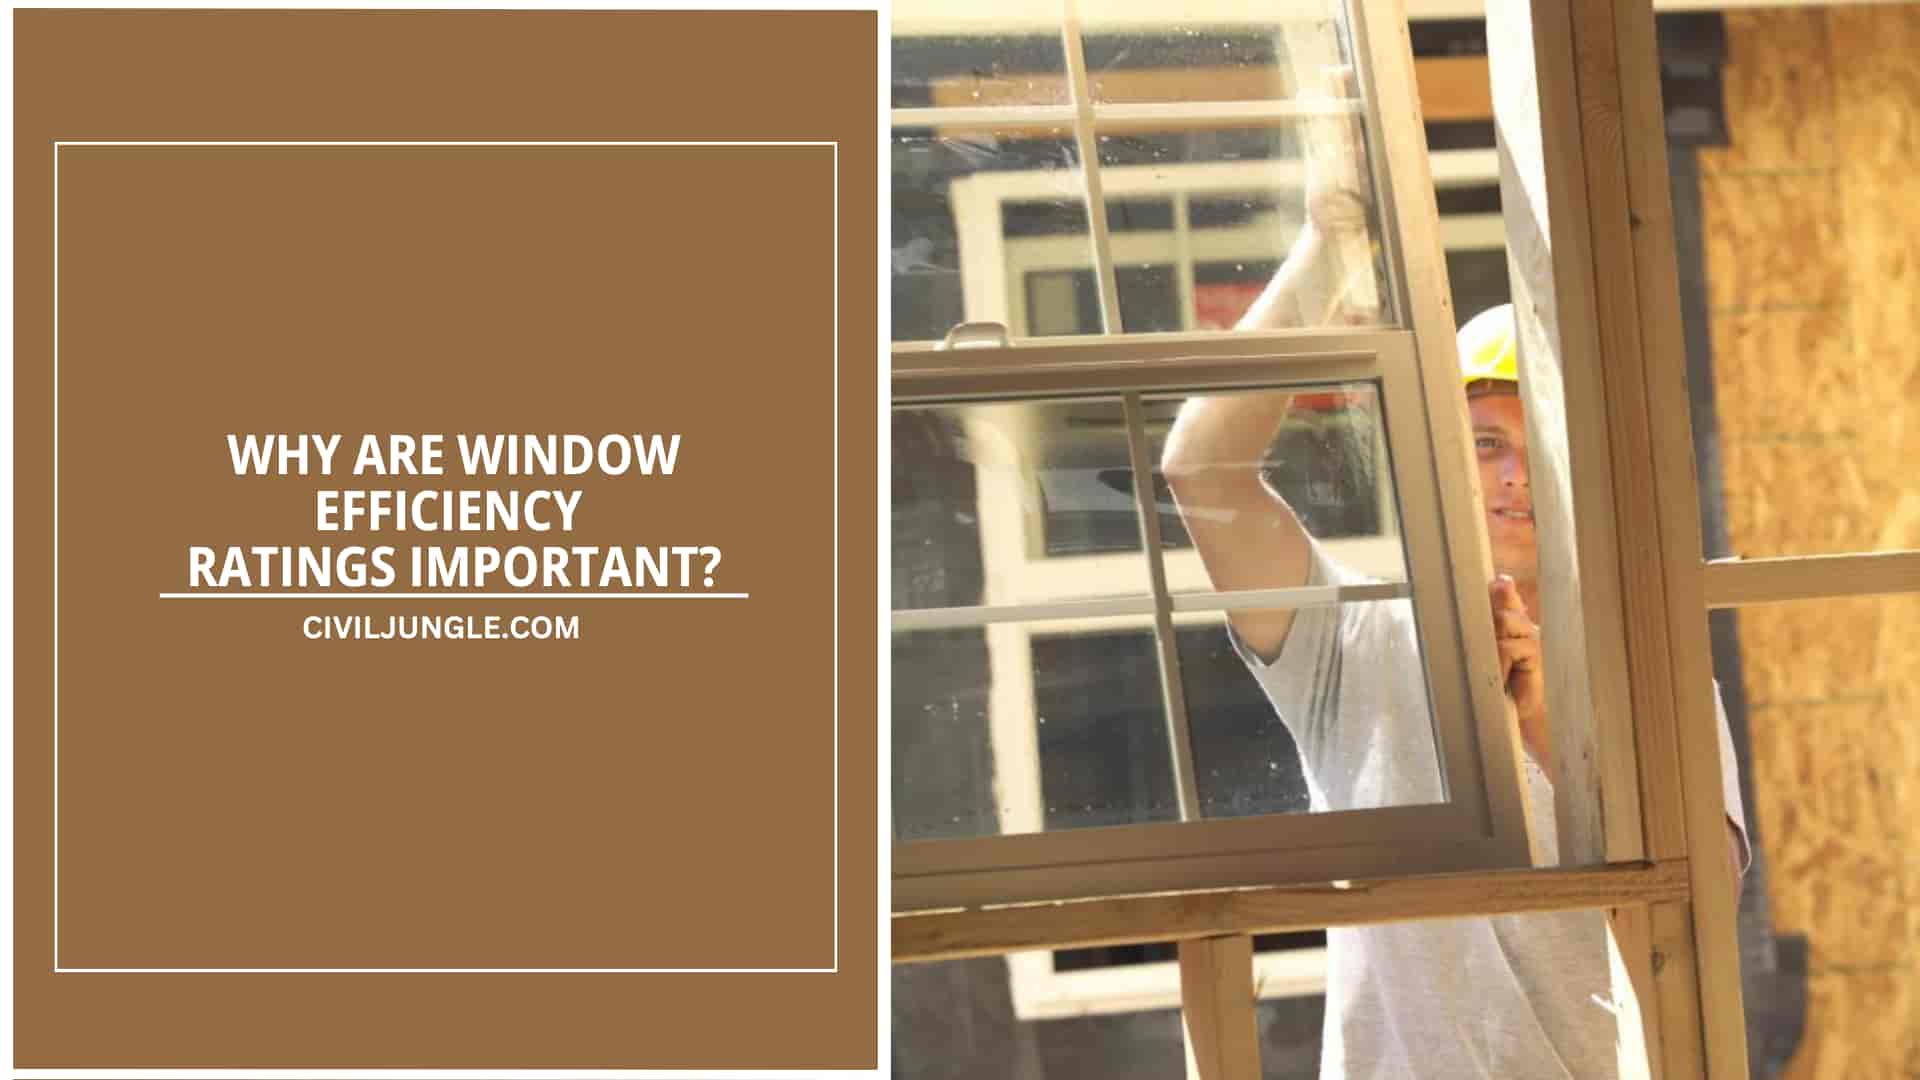 Why Are Window Efficiency Ratings Important?